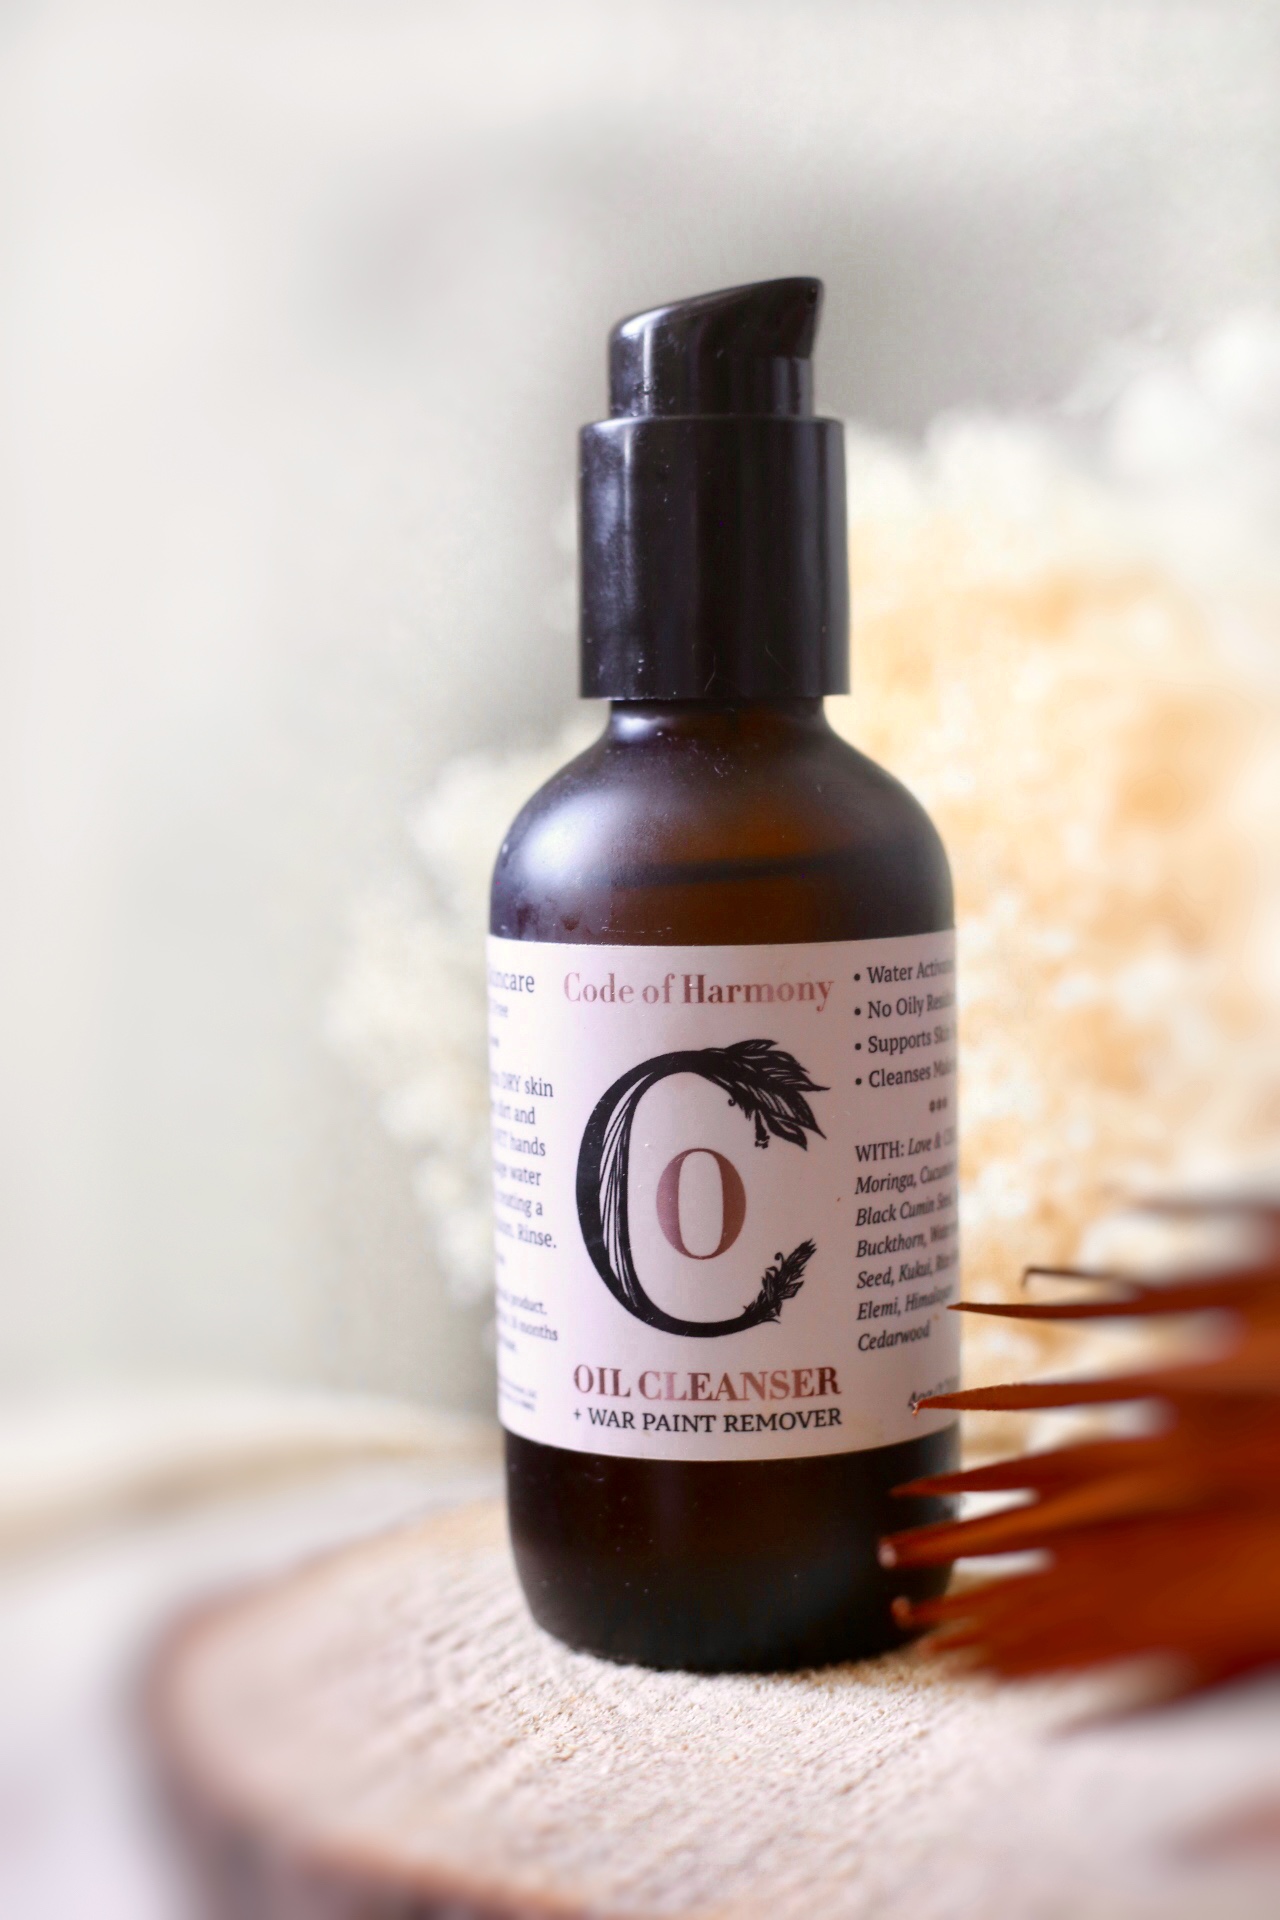 Code of harmony oil cleanser